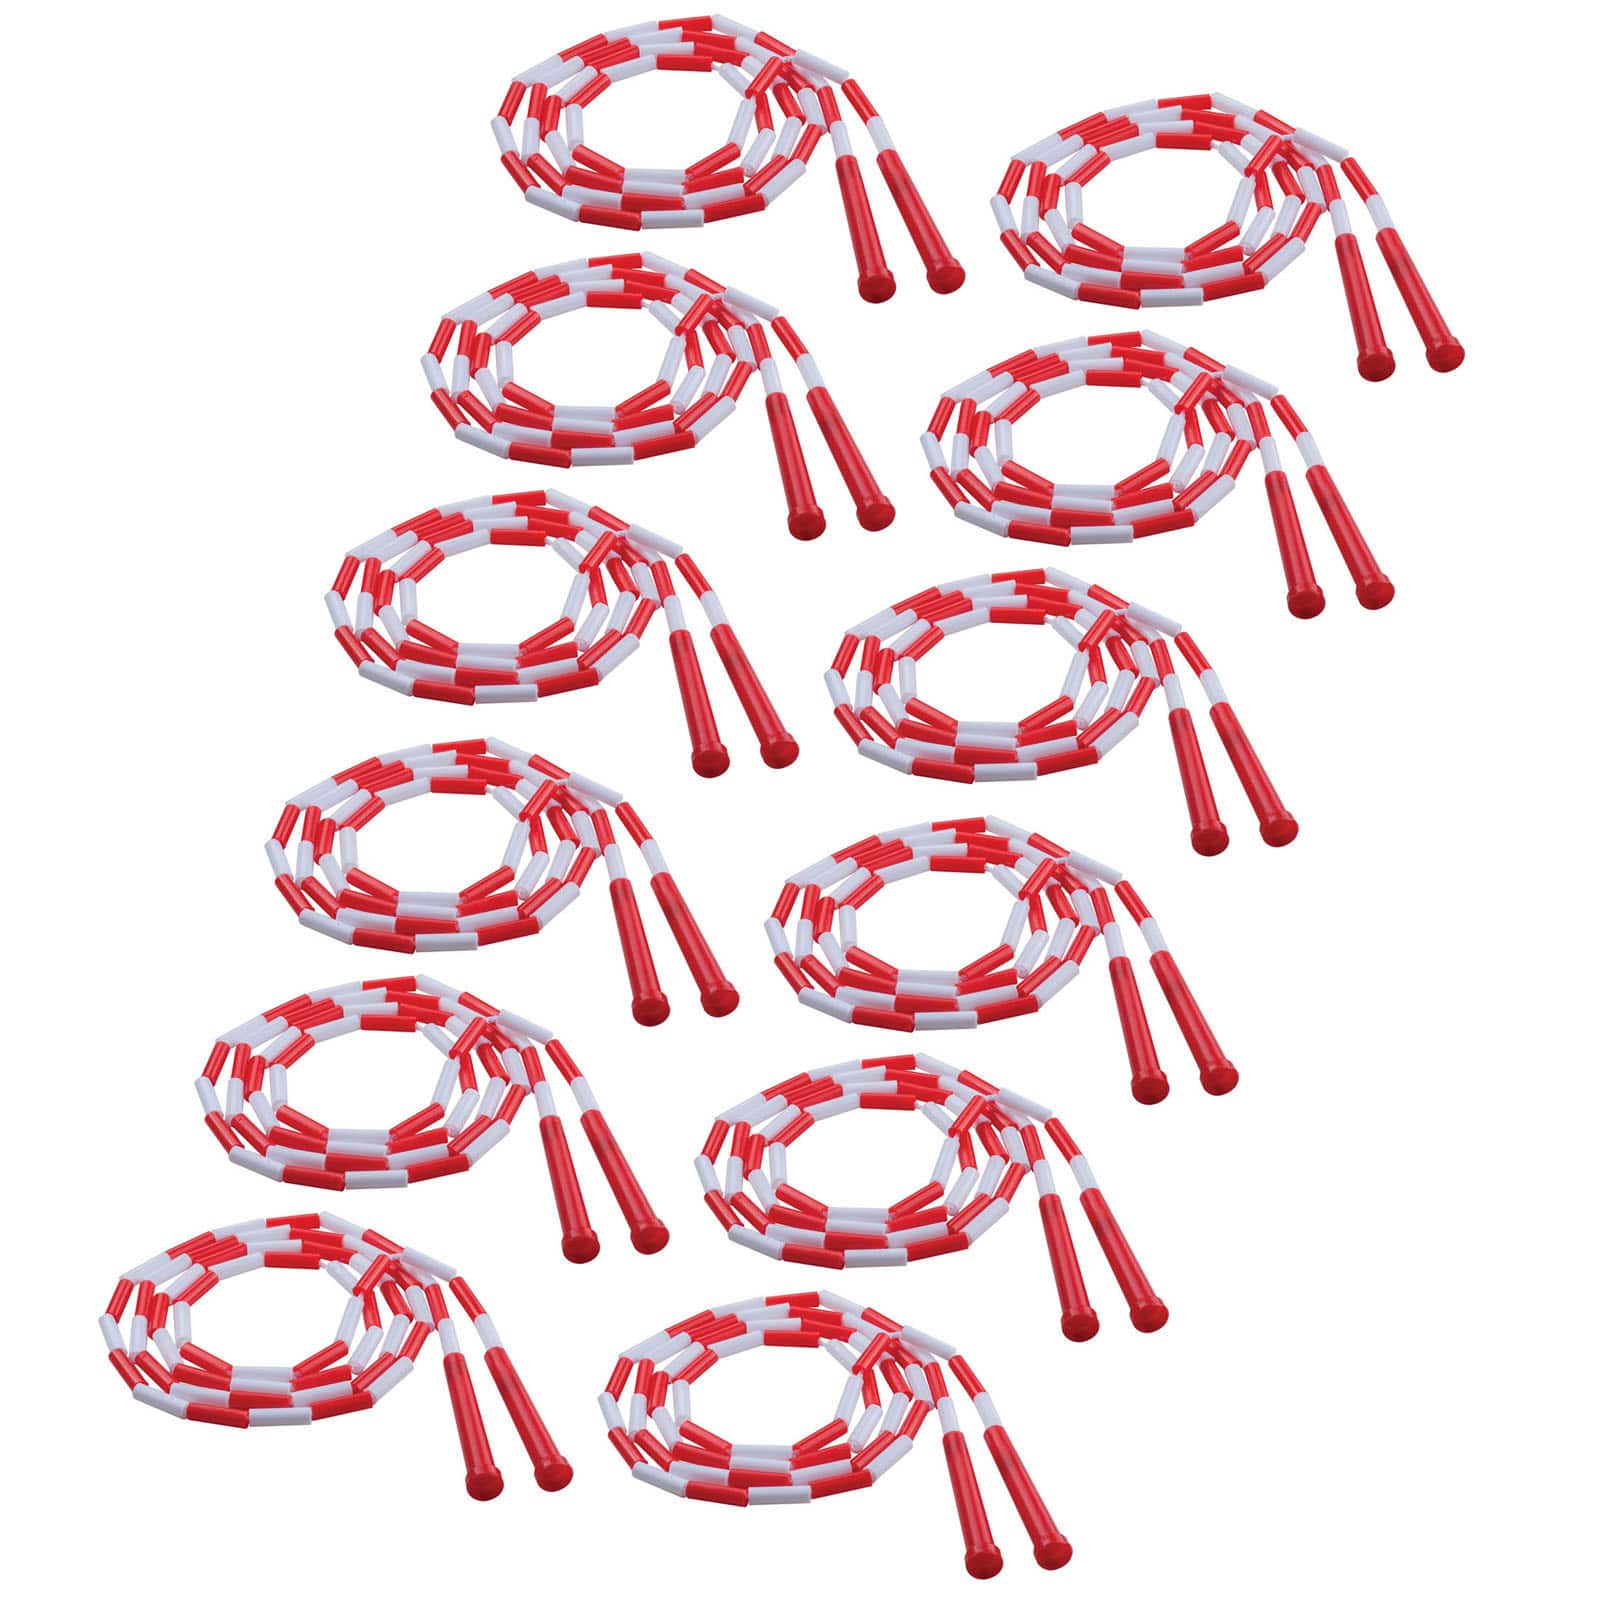 Champion Sports 7ft. Plastic Segmented Jump Rope, Pack of 12